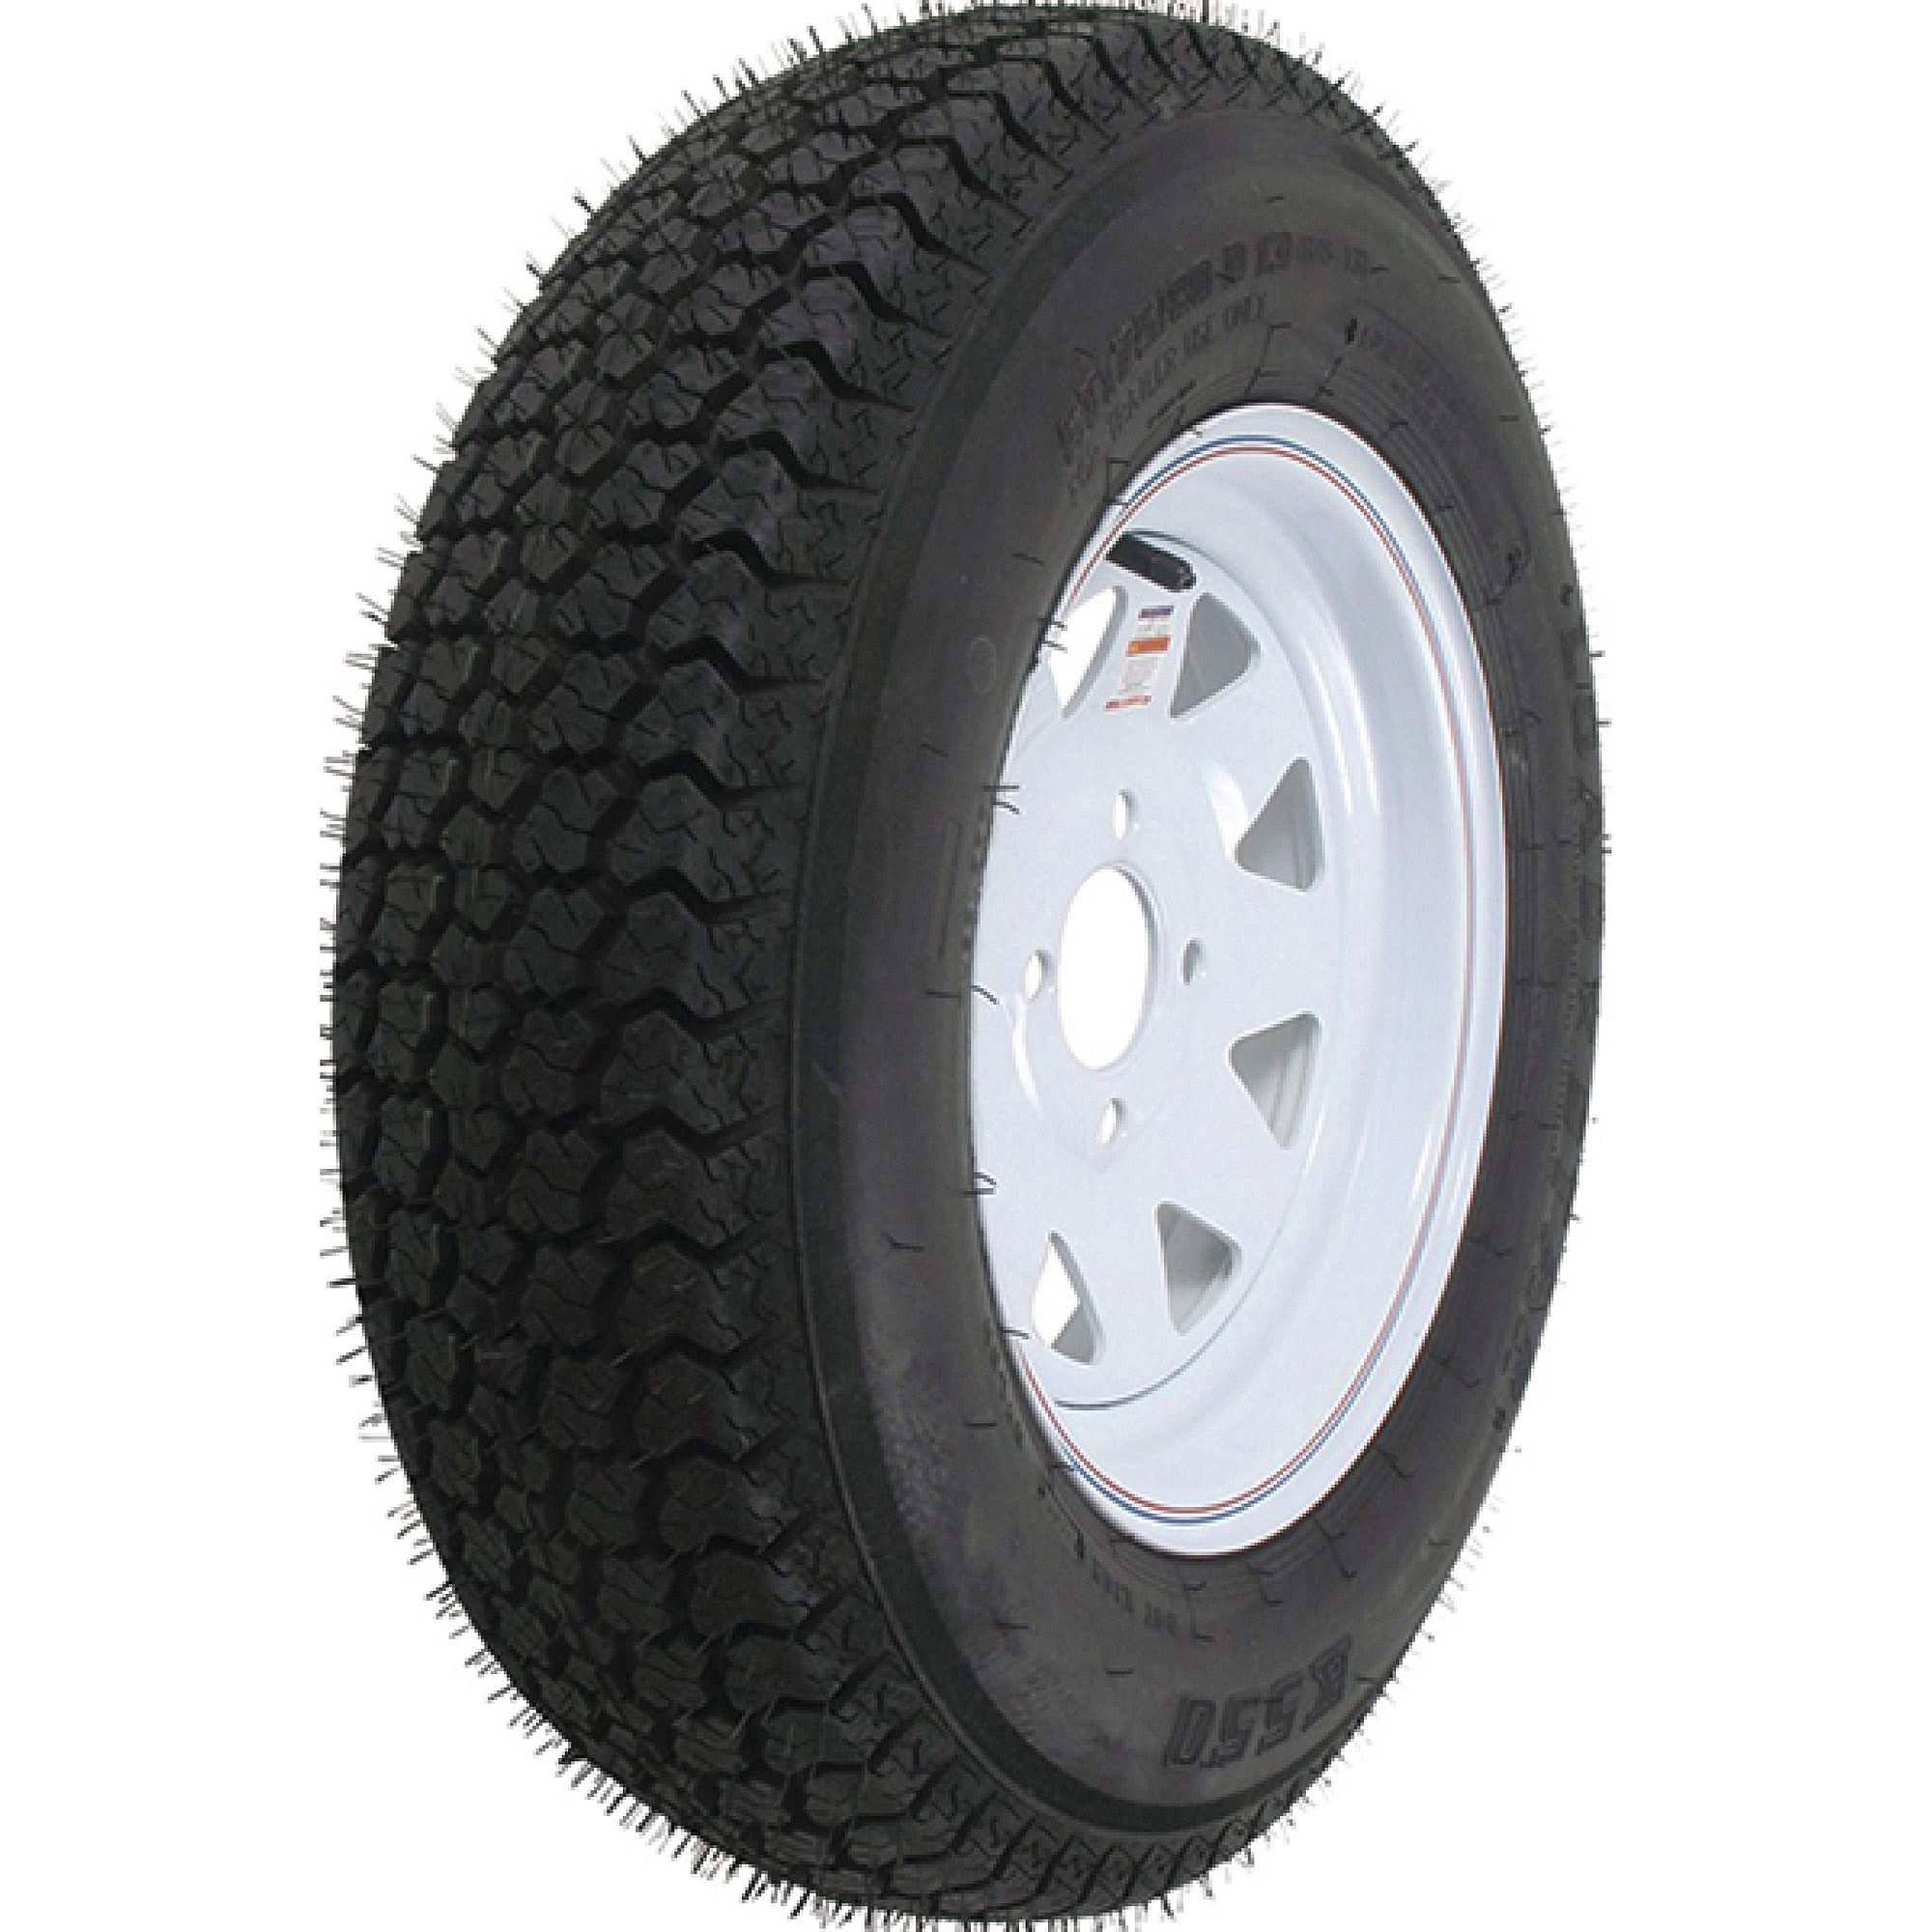 Loadstar Bias Tire and Wheel (Rim) Assembly ST205/75D-15 5 Hole C ...